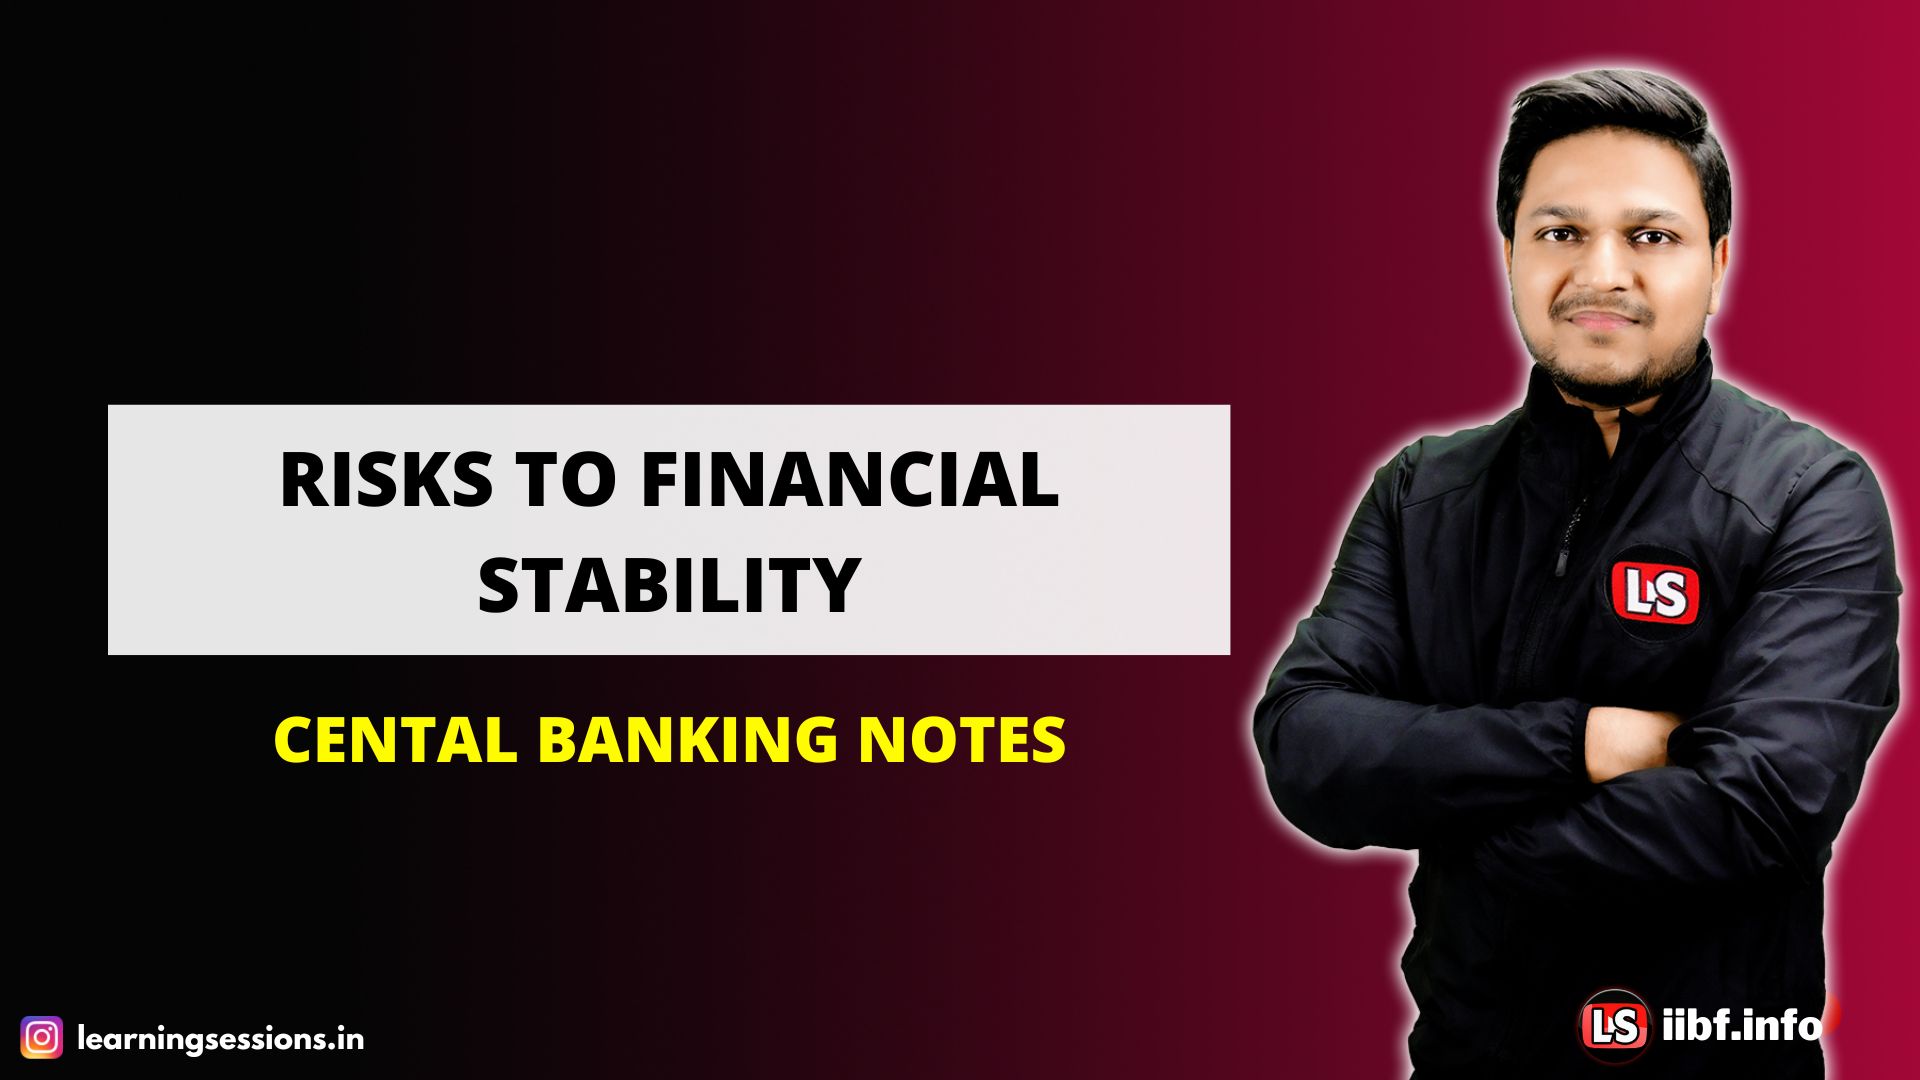 RISKS TO FINANCIAL STABILITY | CENTAL BANKING NOTES